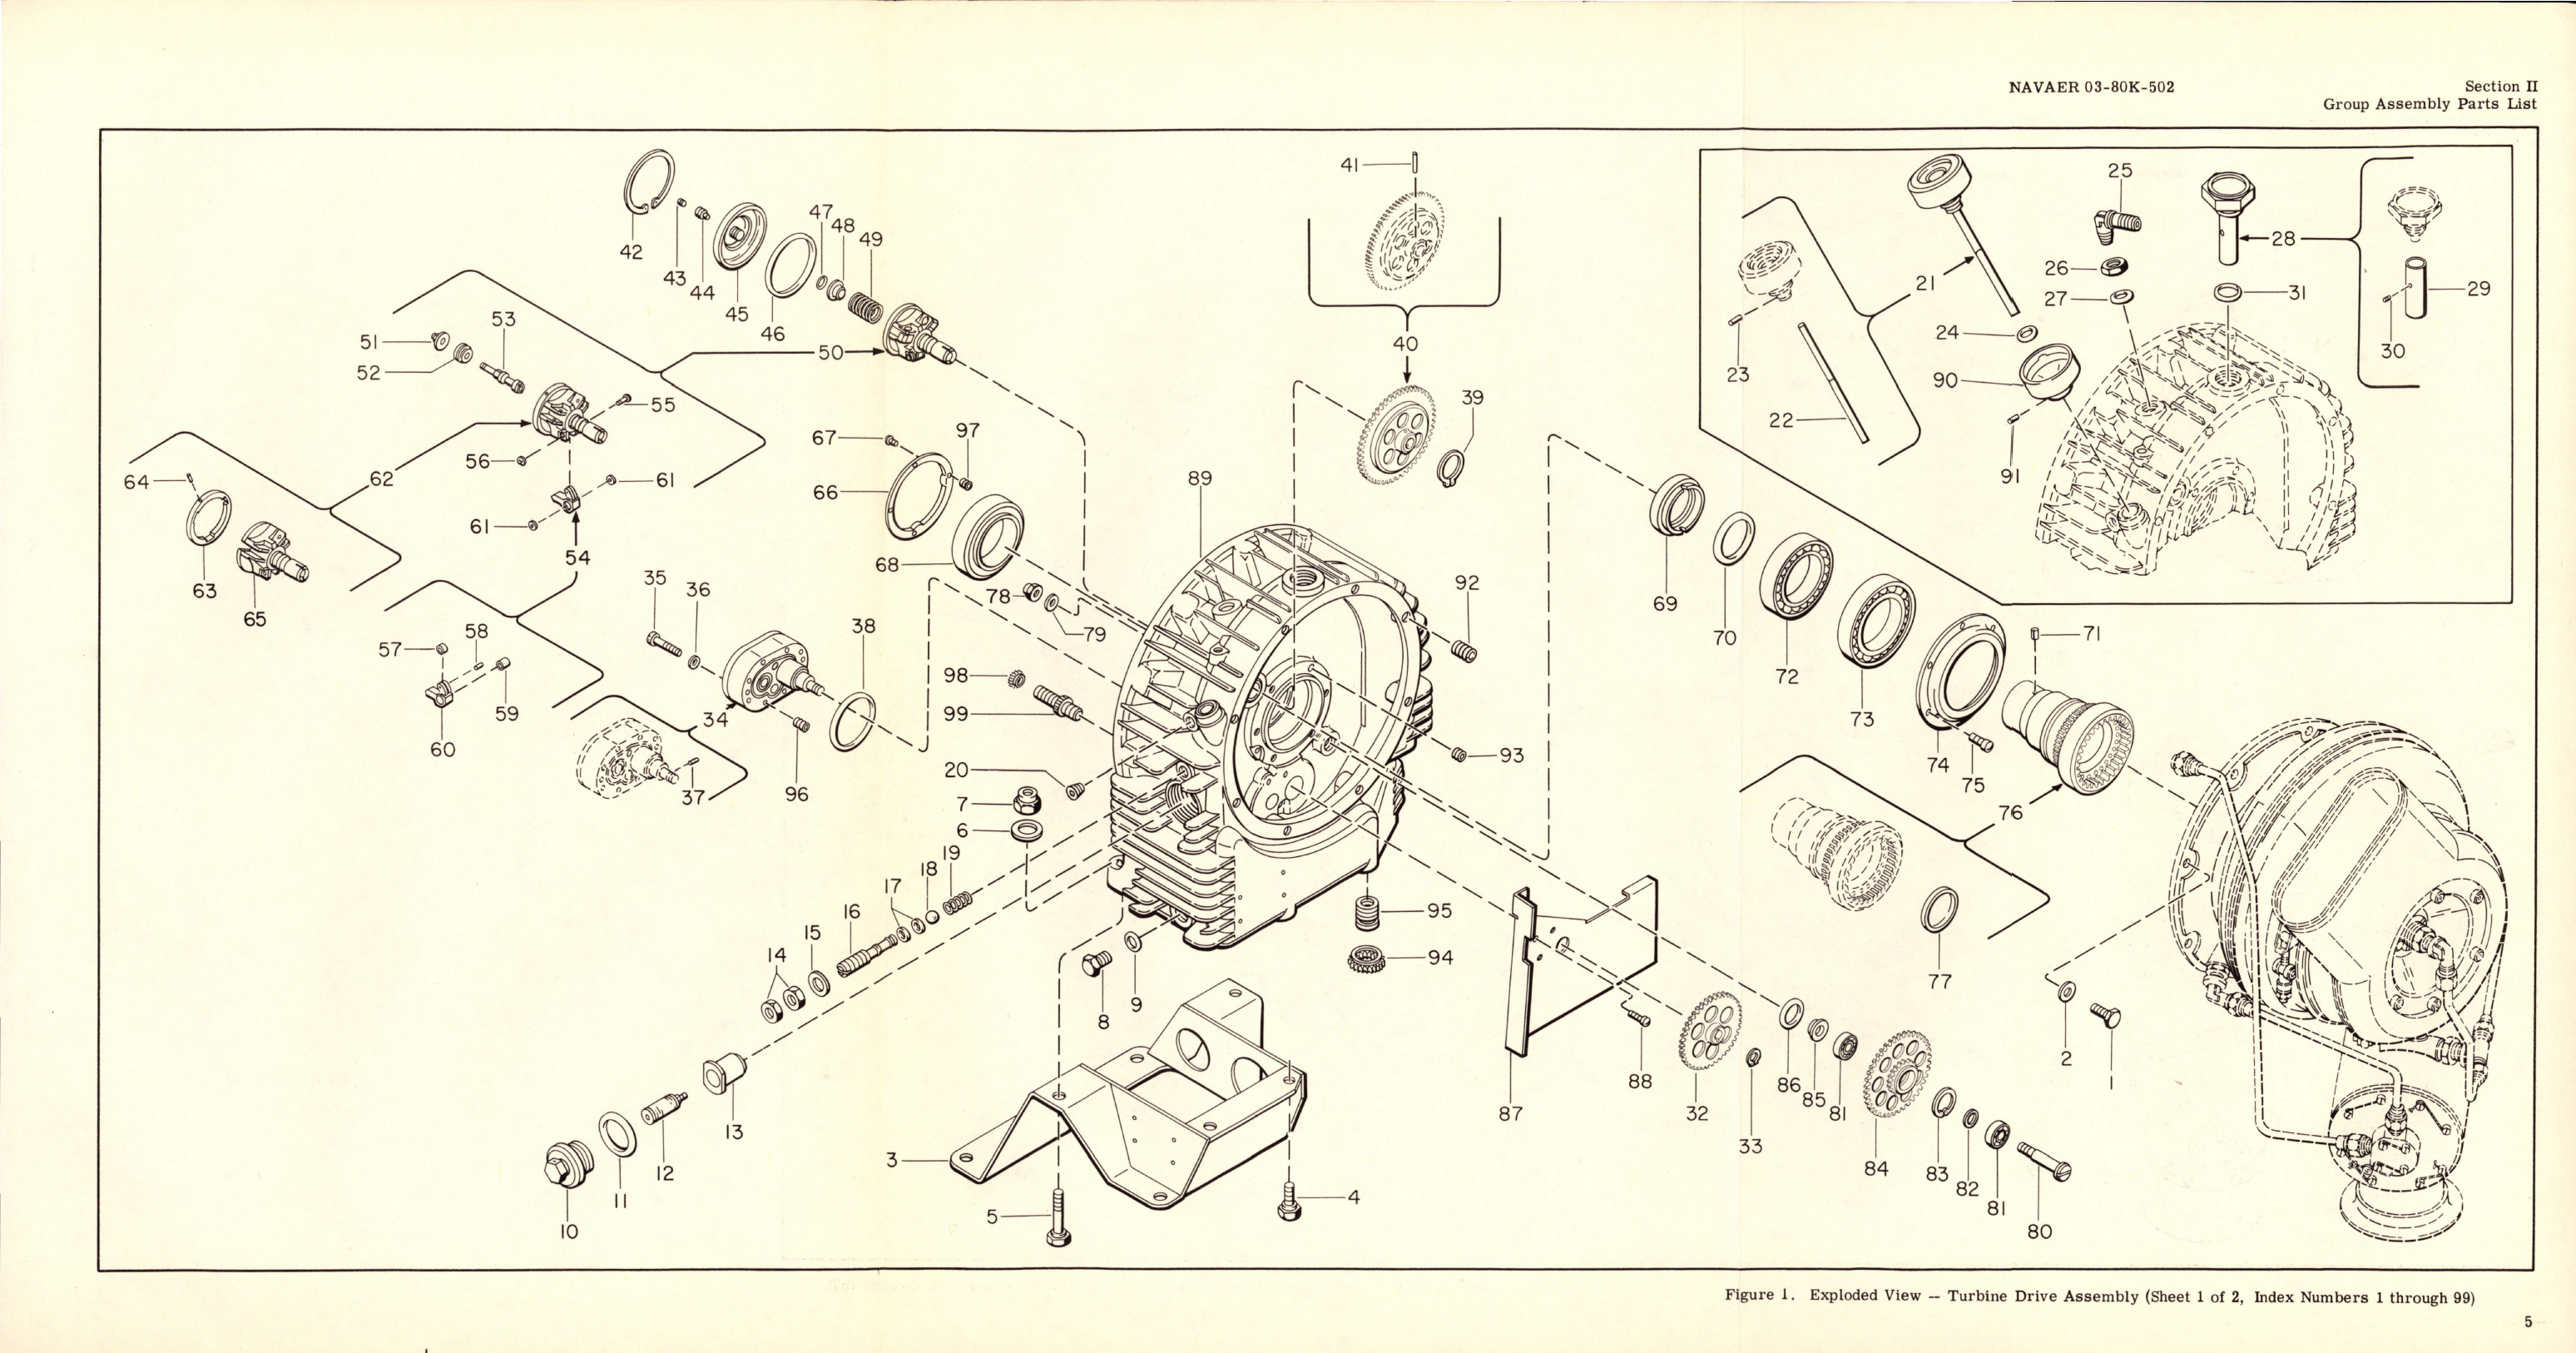 Sample page 7 from AirCorps Library document: Illustrated Parts Breakdown for Turbine Drive Assembly - Part 46E00-1-F 